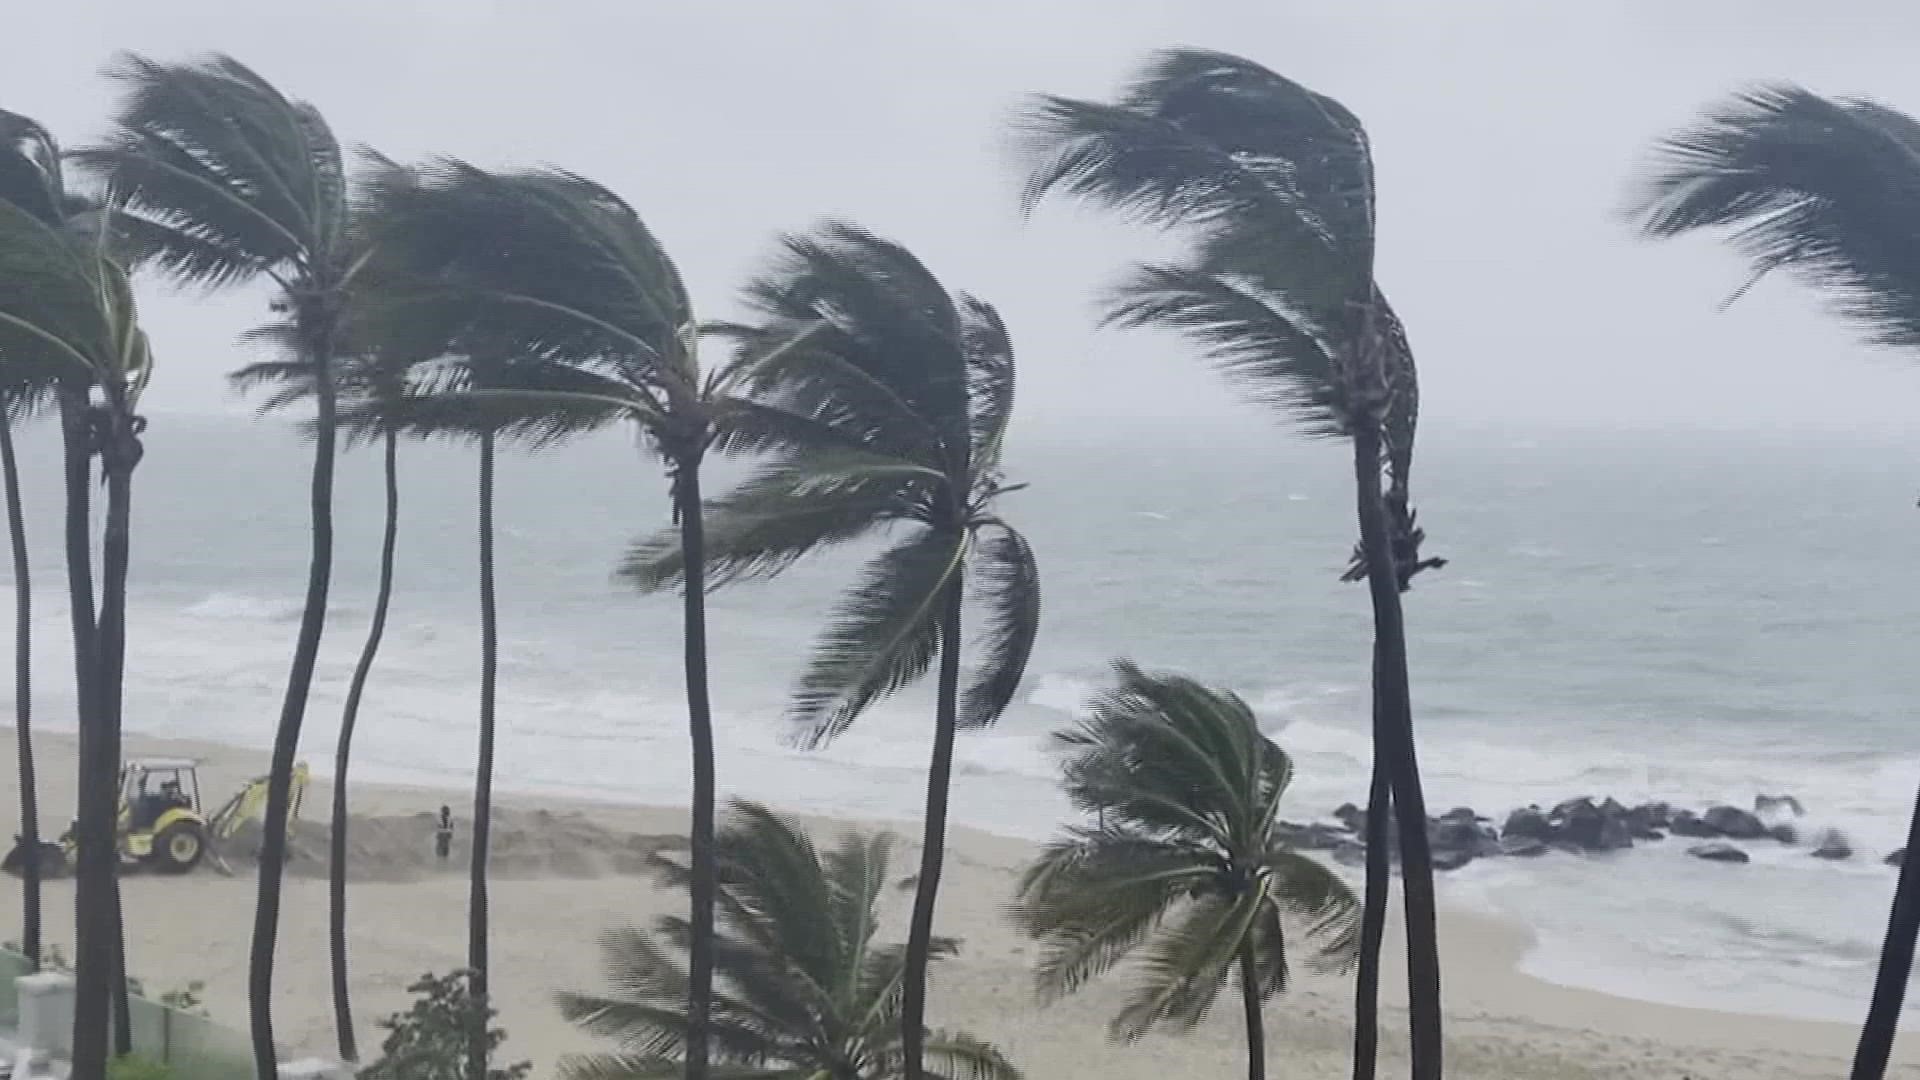 The governor of Puerto Rico said the electrical system is currently out of service.